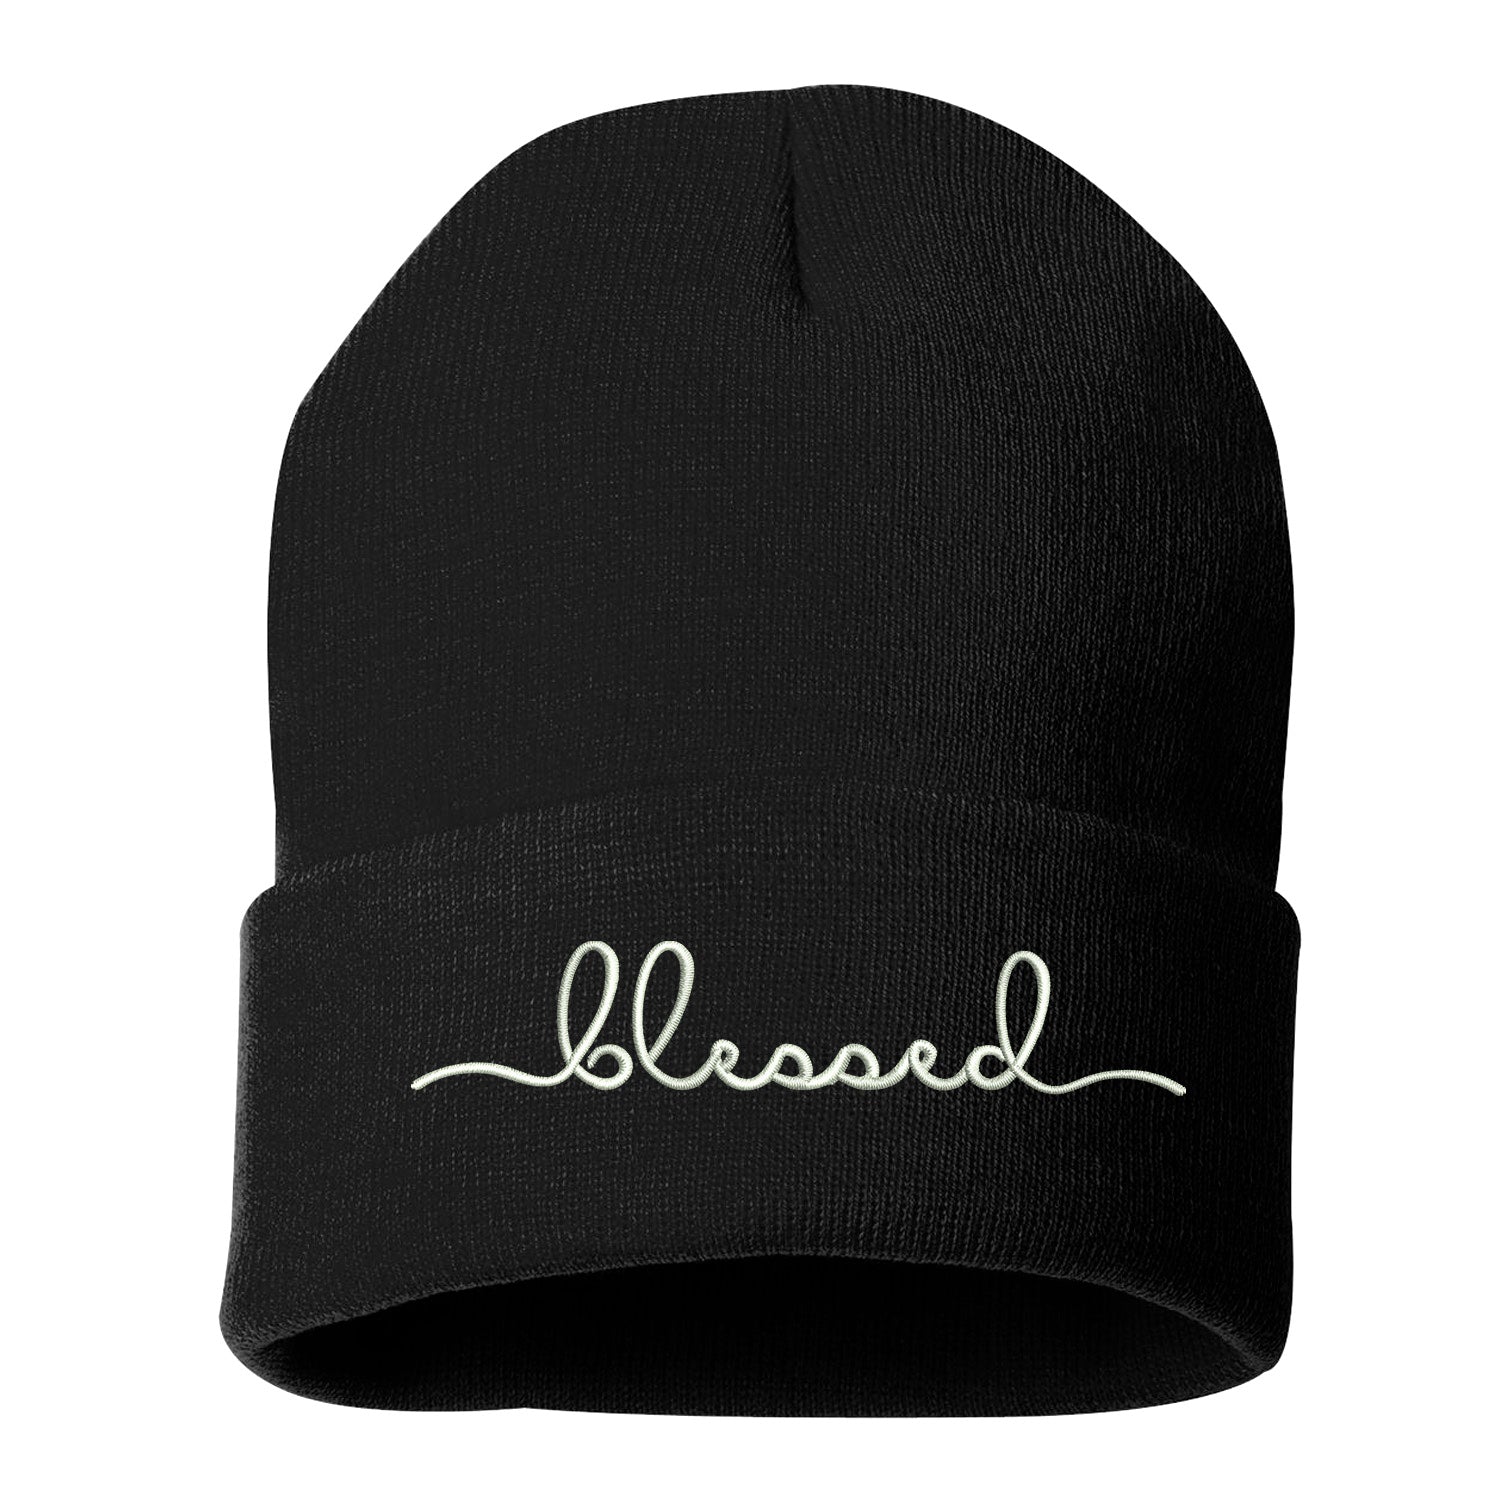 Unisex Blessed Cuffed Beanie Hat, Embroidered Beanie Cap, Cuffed Beanie, Blessed Beanie Hat, Custom Embroidery, Blessed, Thanksgiving Hat, Cursive Text, Embroidered Text, Black Beanie Cap Hat, DSY Lifestyle Beanie, Made in LA